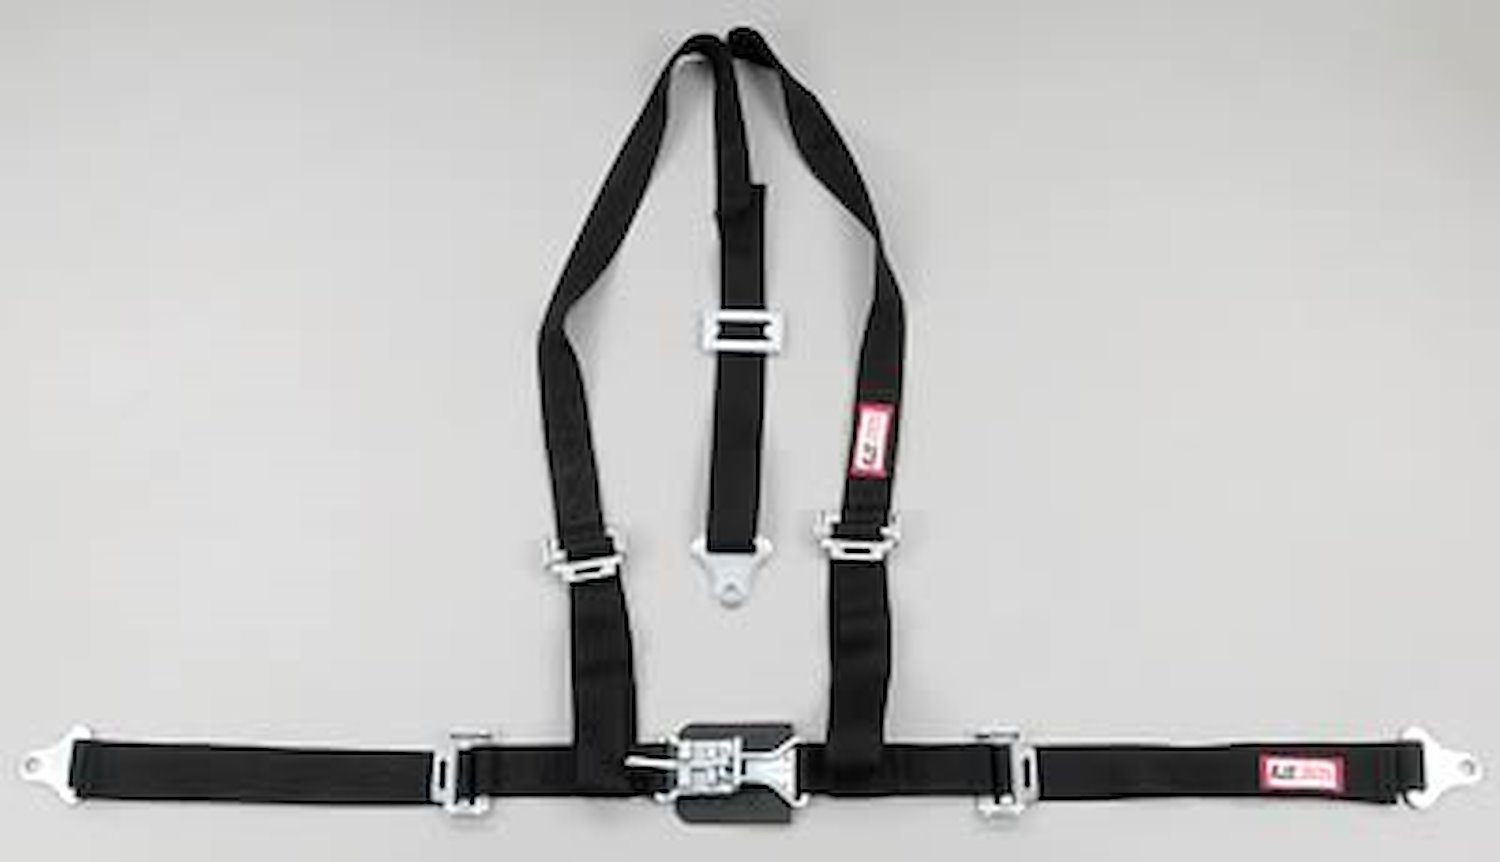 NON-SFI L&L HARNESS 2 PULL UP Lap Belt w/Adjuster 2 S.H. Y FLOOR MOUNT w/STERNUM STRAP ALL WRAP ENDS PURPLE